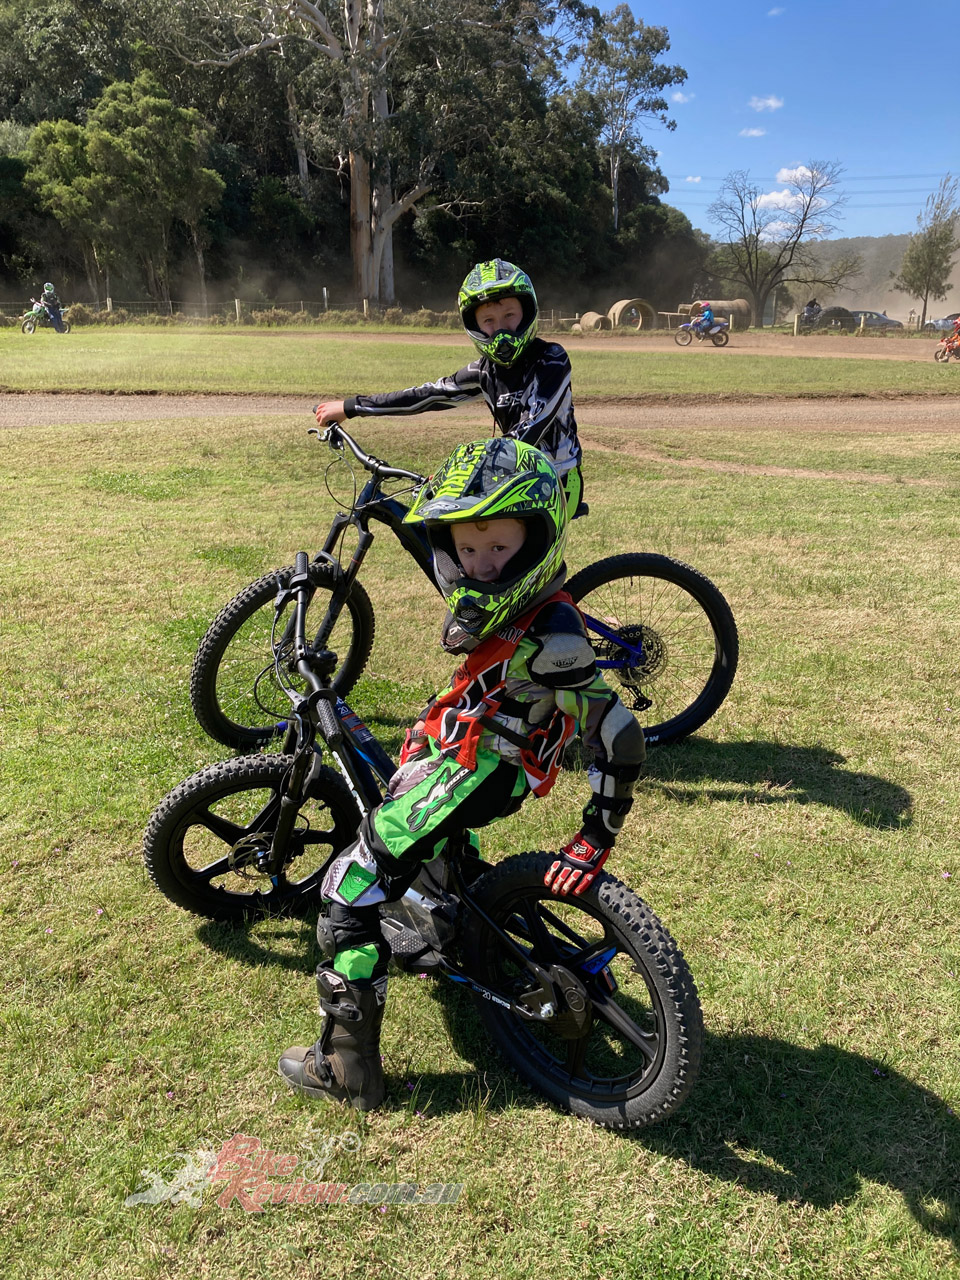 My oldest boy is 12, and has been riding the YDX Moro07, Torrot MX2, his KTM two-stroke a lot lately, but always wanted the 20eDRIVE, as he found it so much fun to hoon around on.